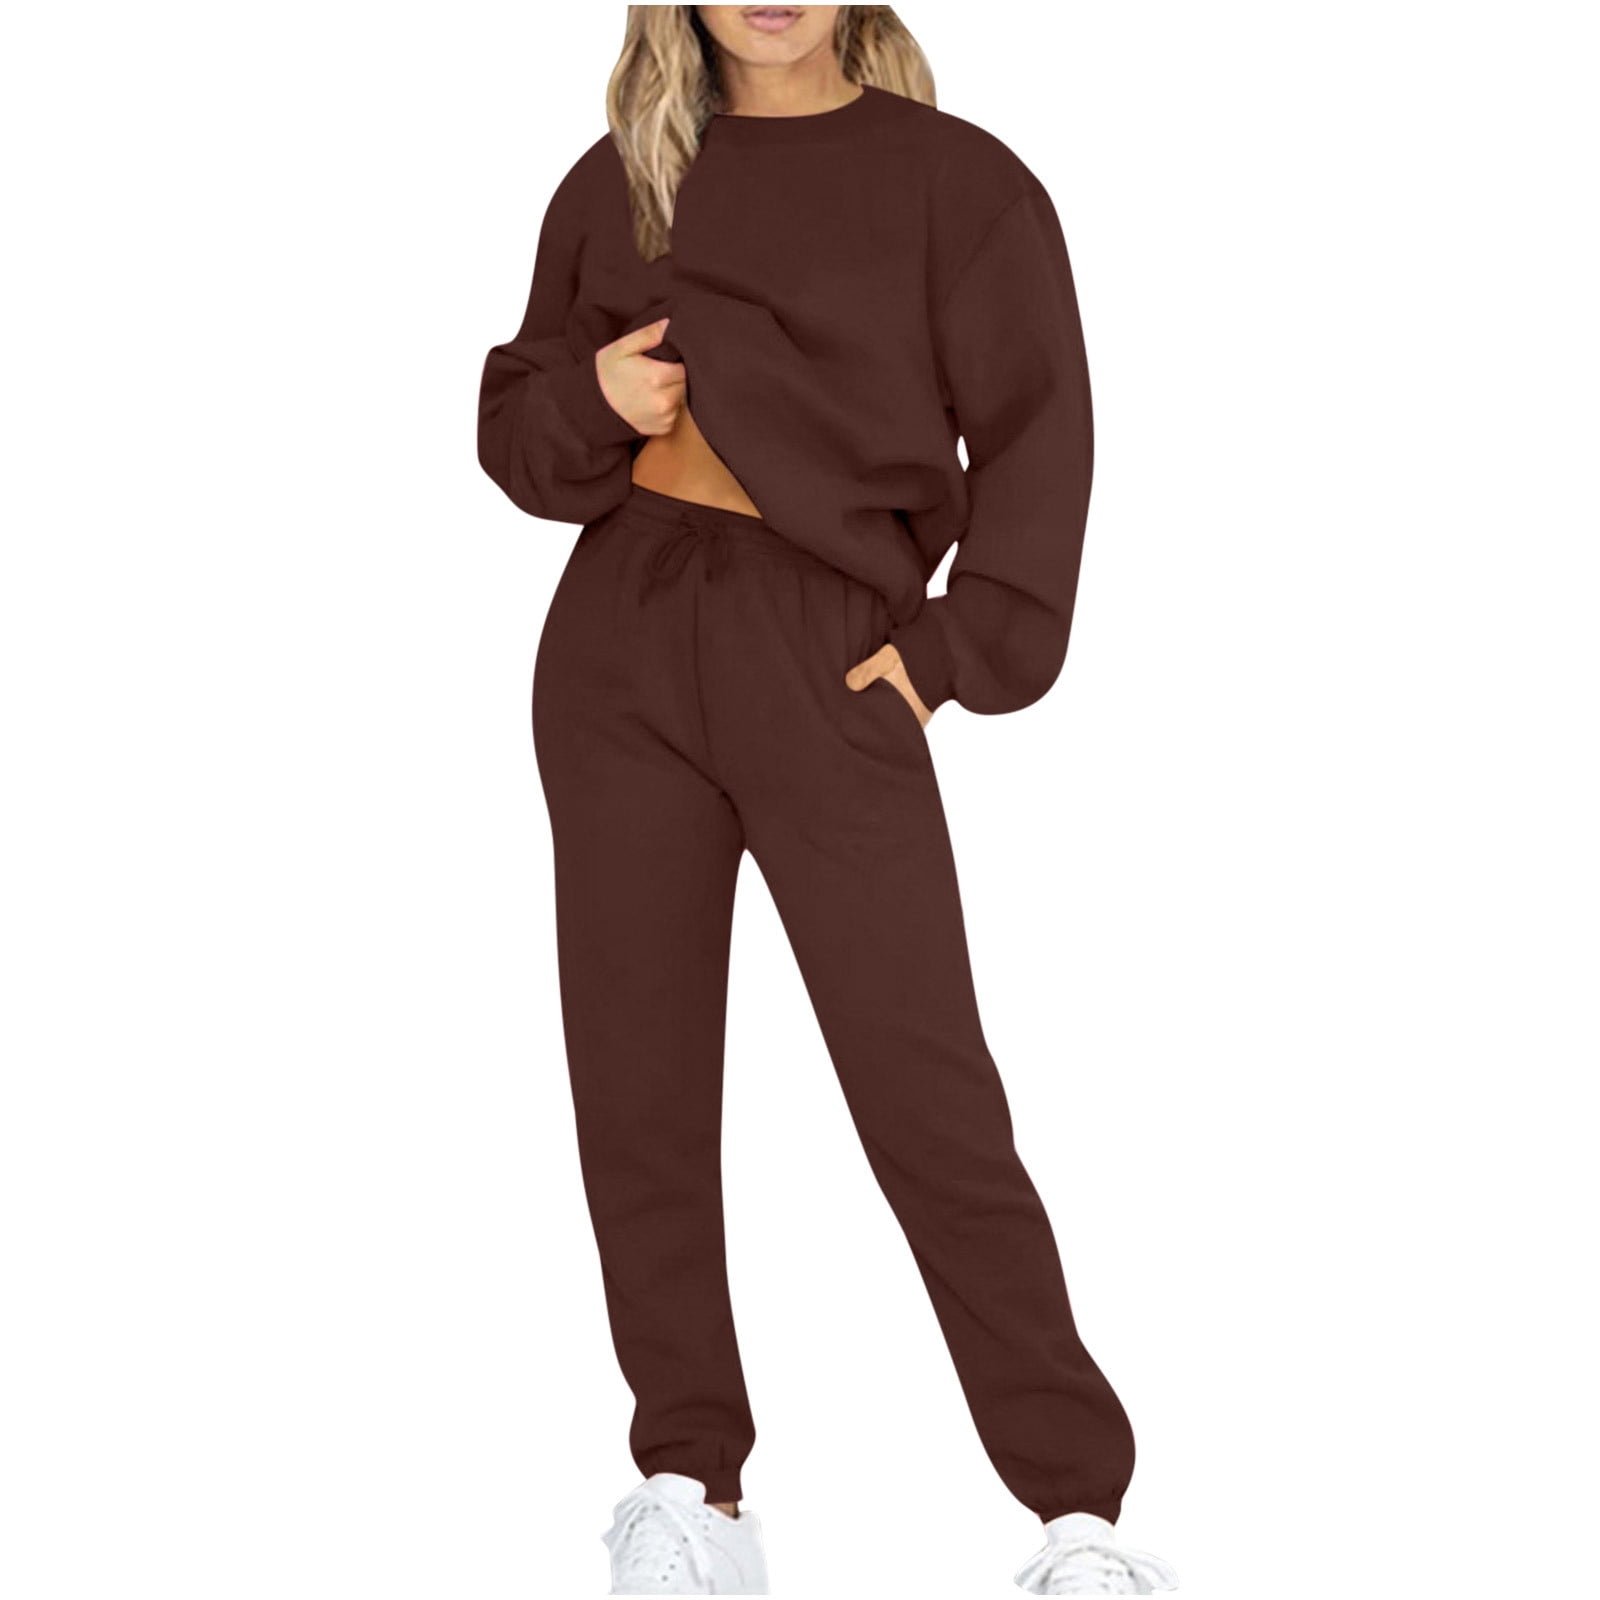 2 Piece Outfits Lounge Sets for Women Casual Long Sleeve Crewneck  Sweatshirt and Sweatpants Tracksuit Loungewear 